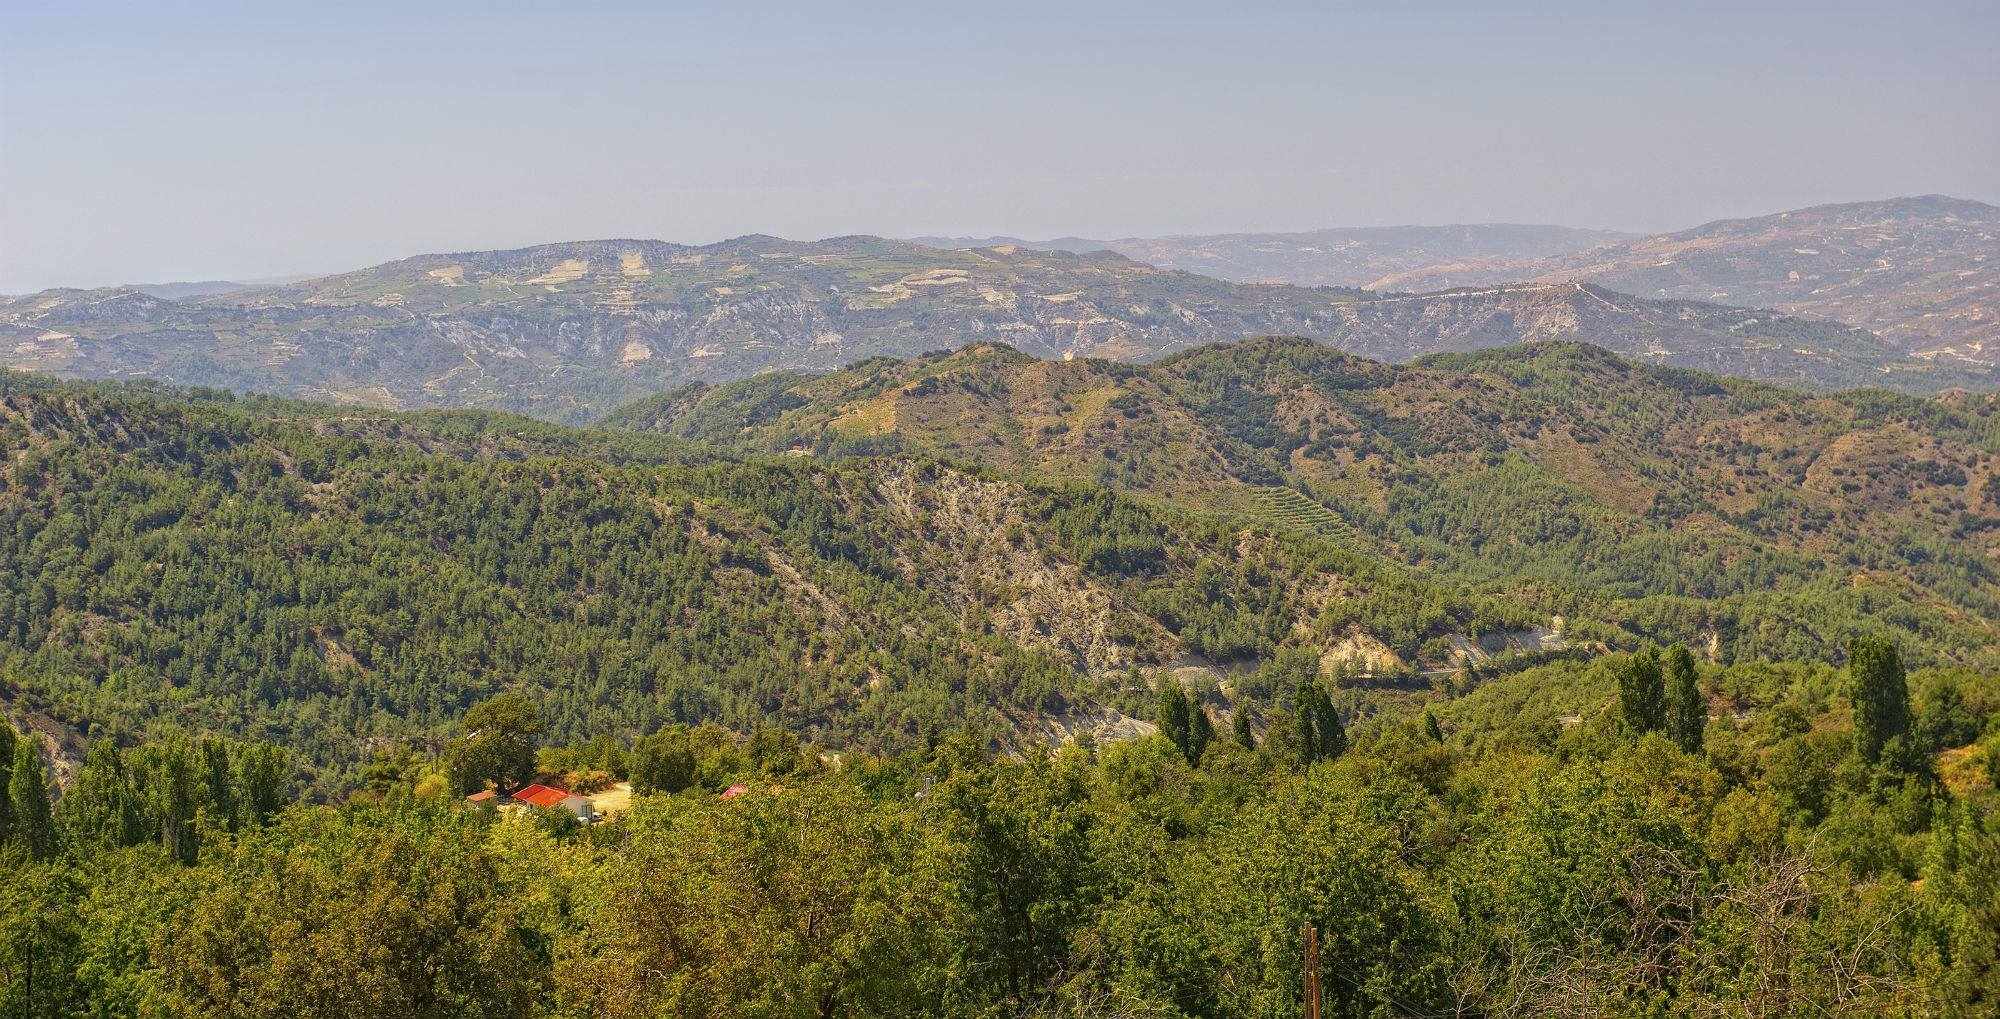 Camping and walking in Troodos